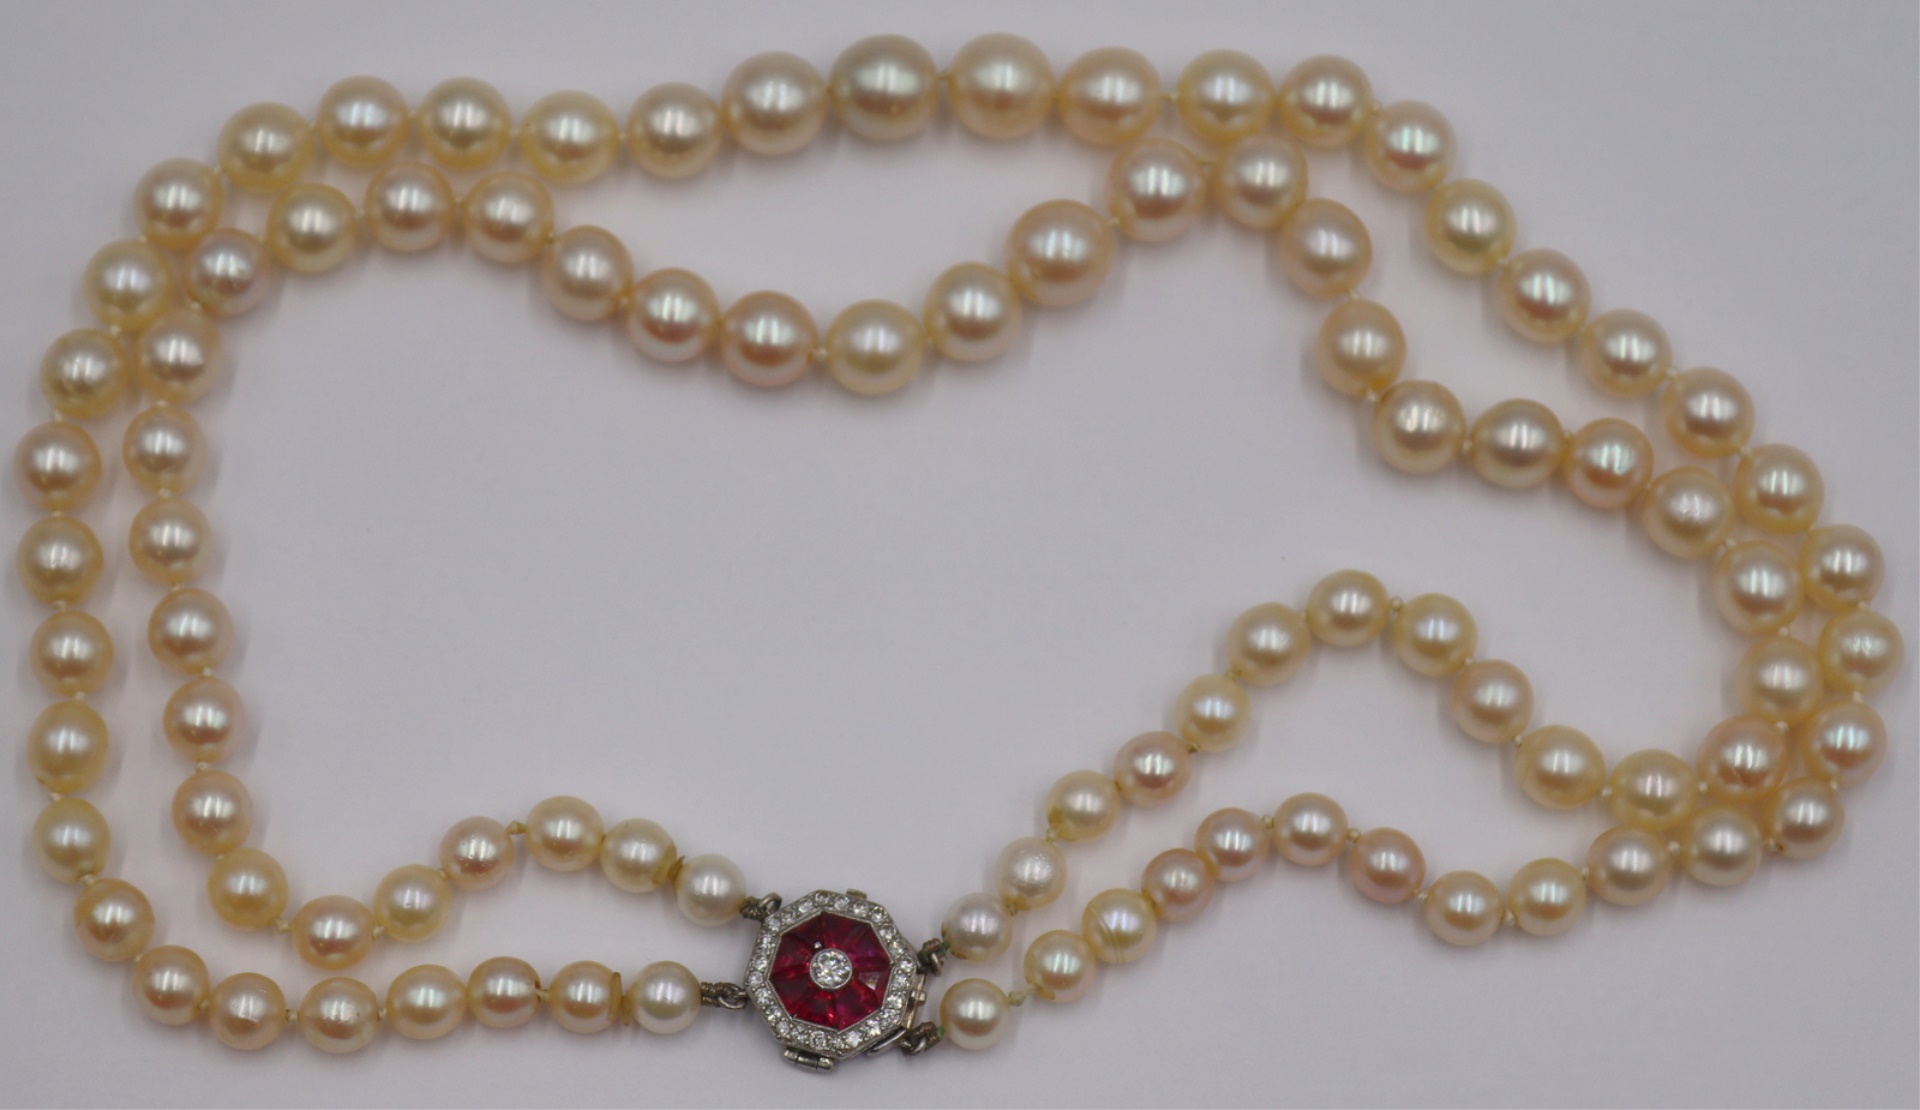 JEWELRY. DOUBLE STRAND PEARL NECKLACE